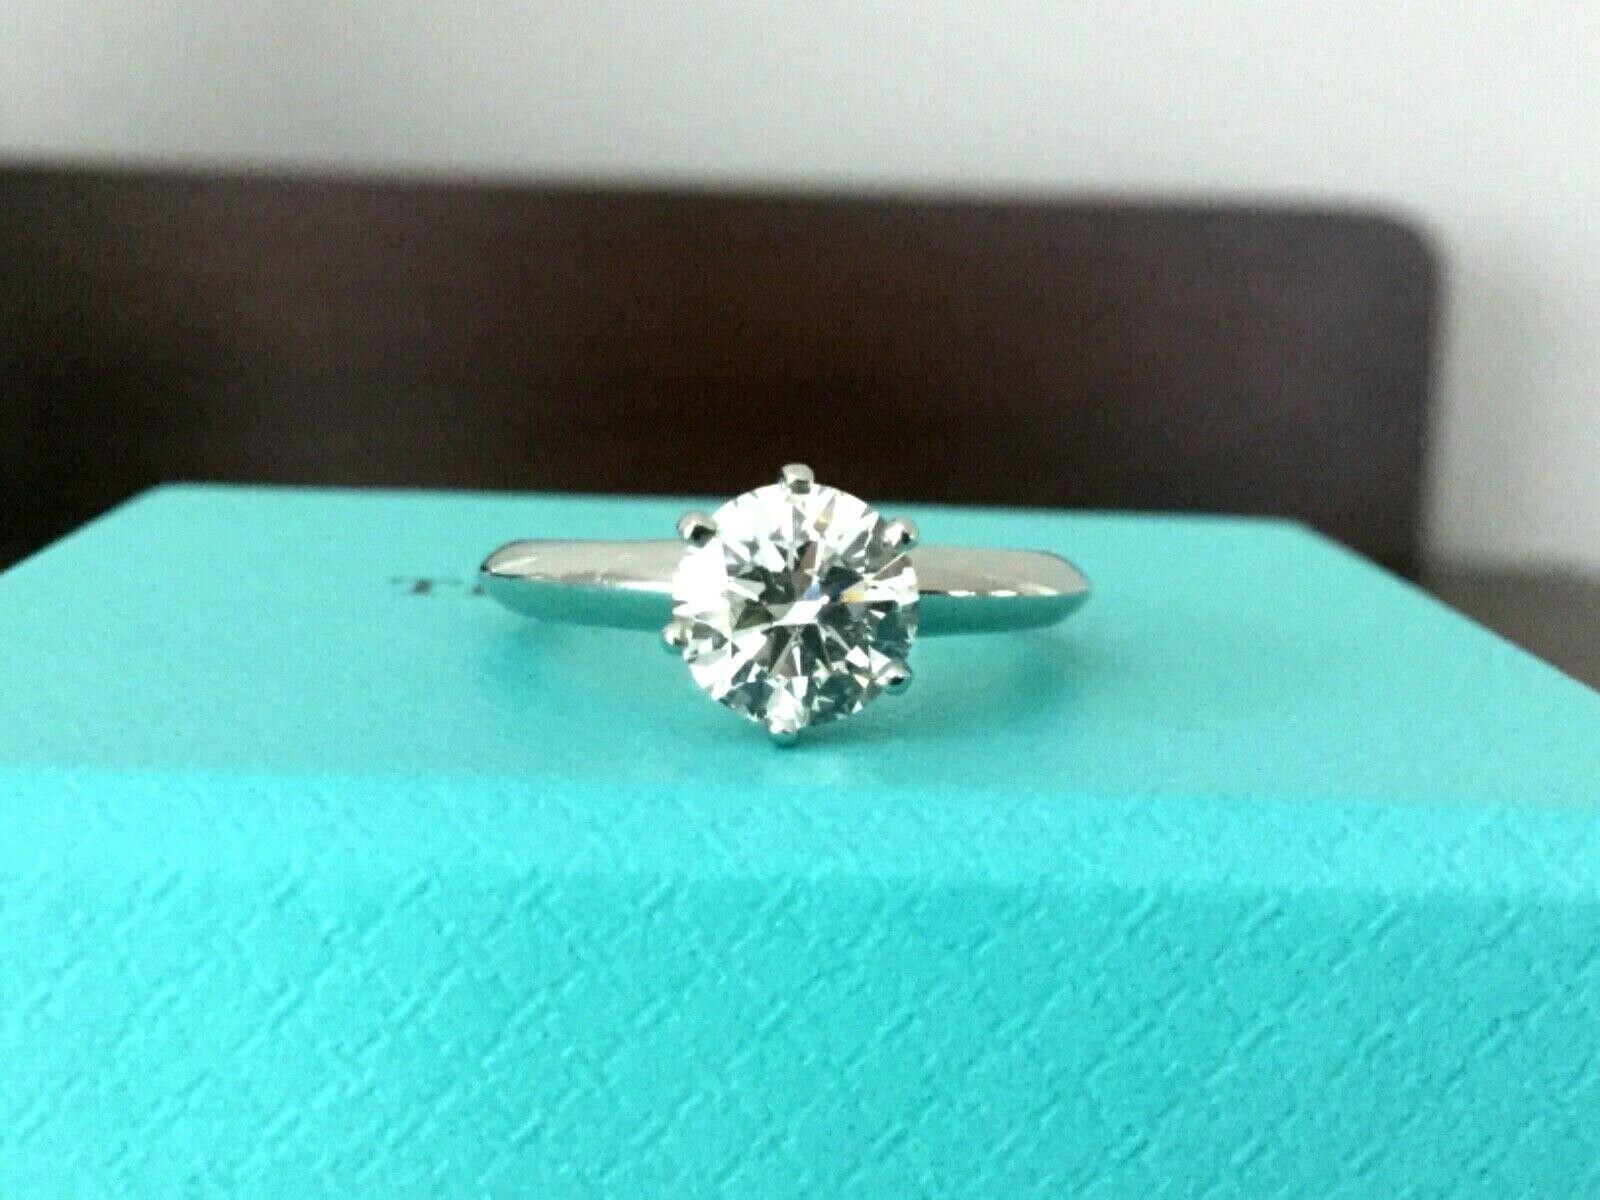 Being offered for your consideration is a like new 2018 Model Tiffany & Co Platinum and Diamond .92 carat natural round engagement ring set in the classic 6 prong setting.  This ring was worn for a 5 week engagement and shows like BRAND NEW having